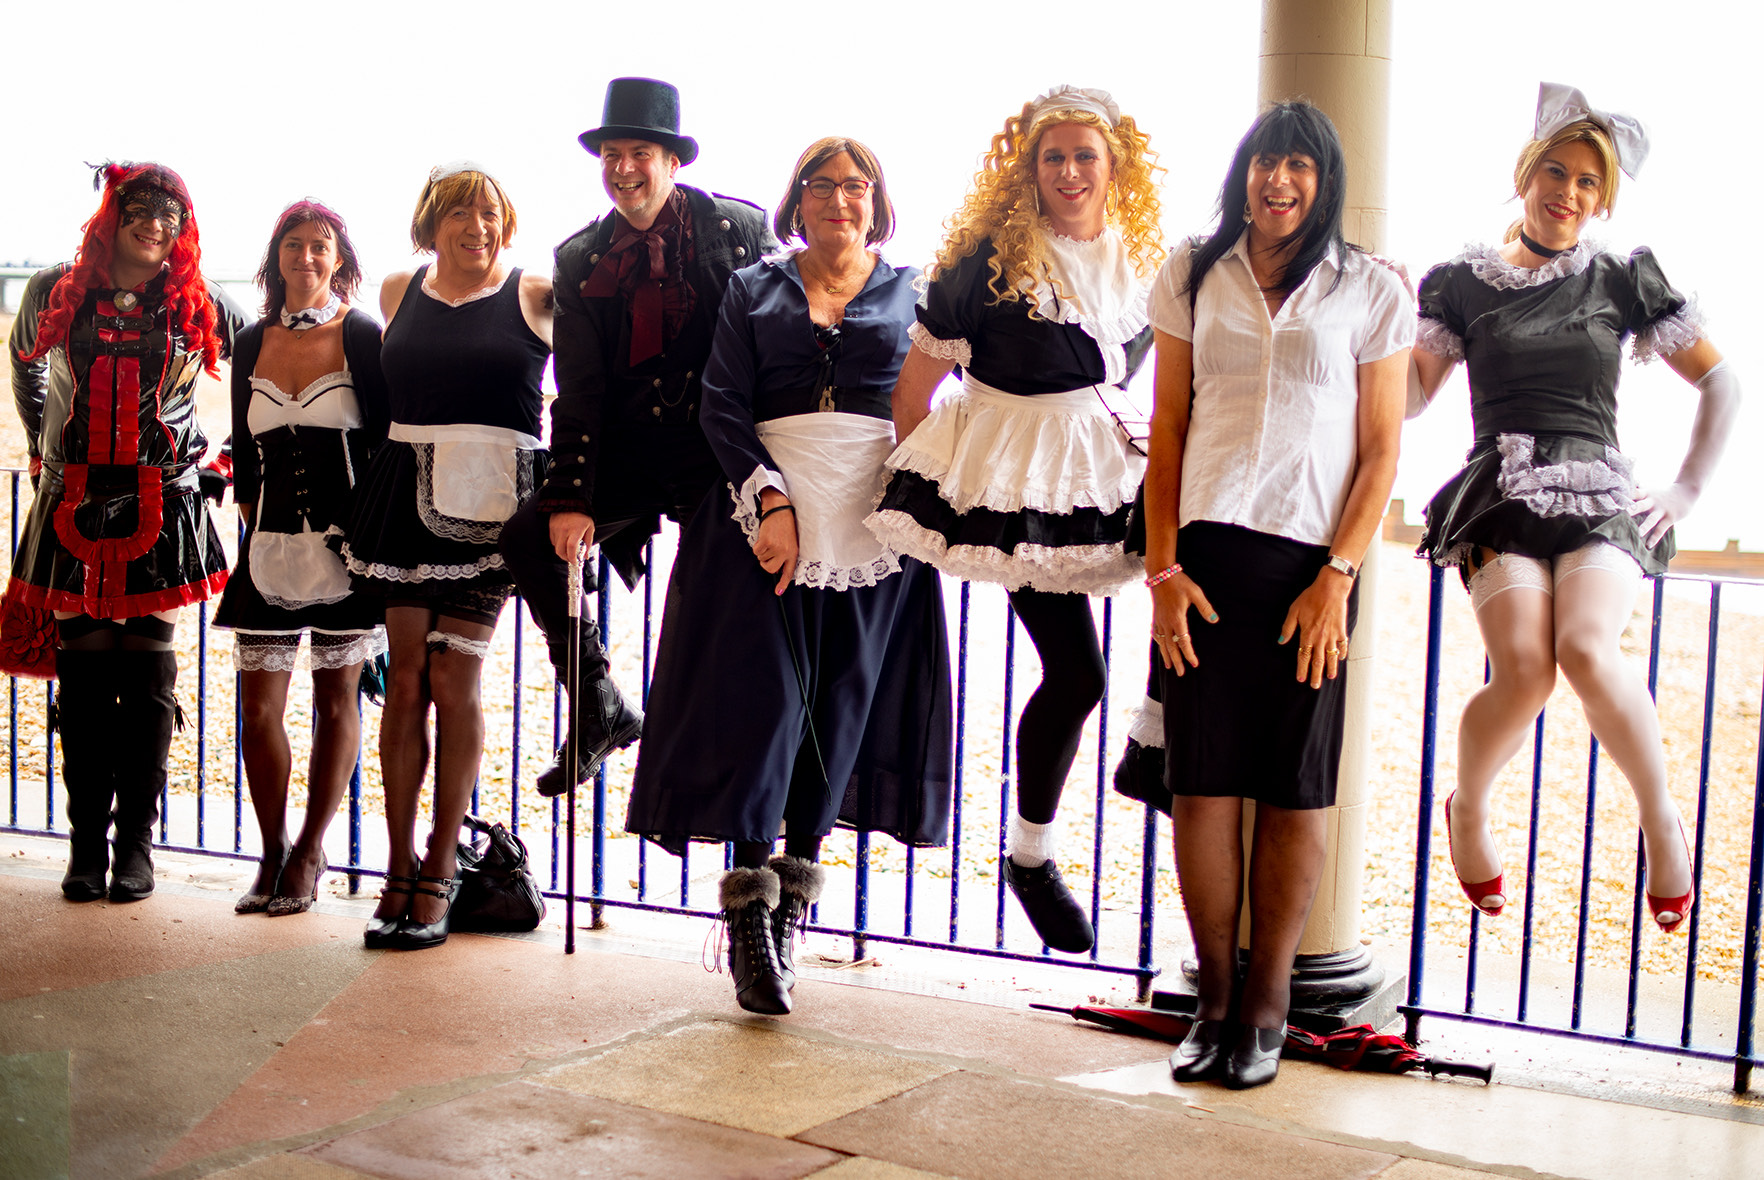 Richard in Steampunk Outfit and Maids at Transliving Weekend Eastbourne